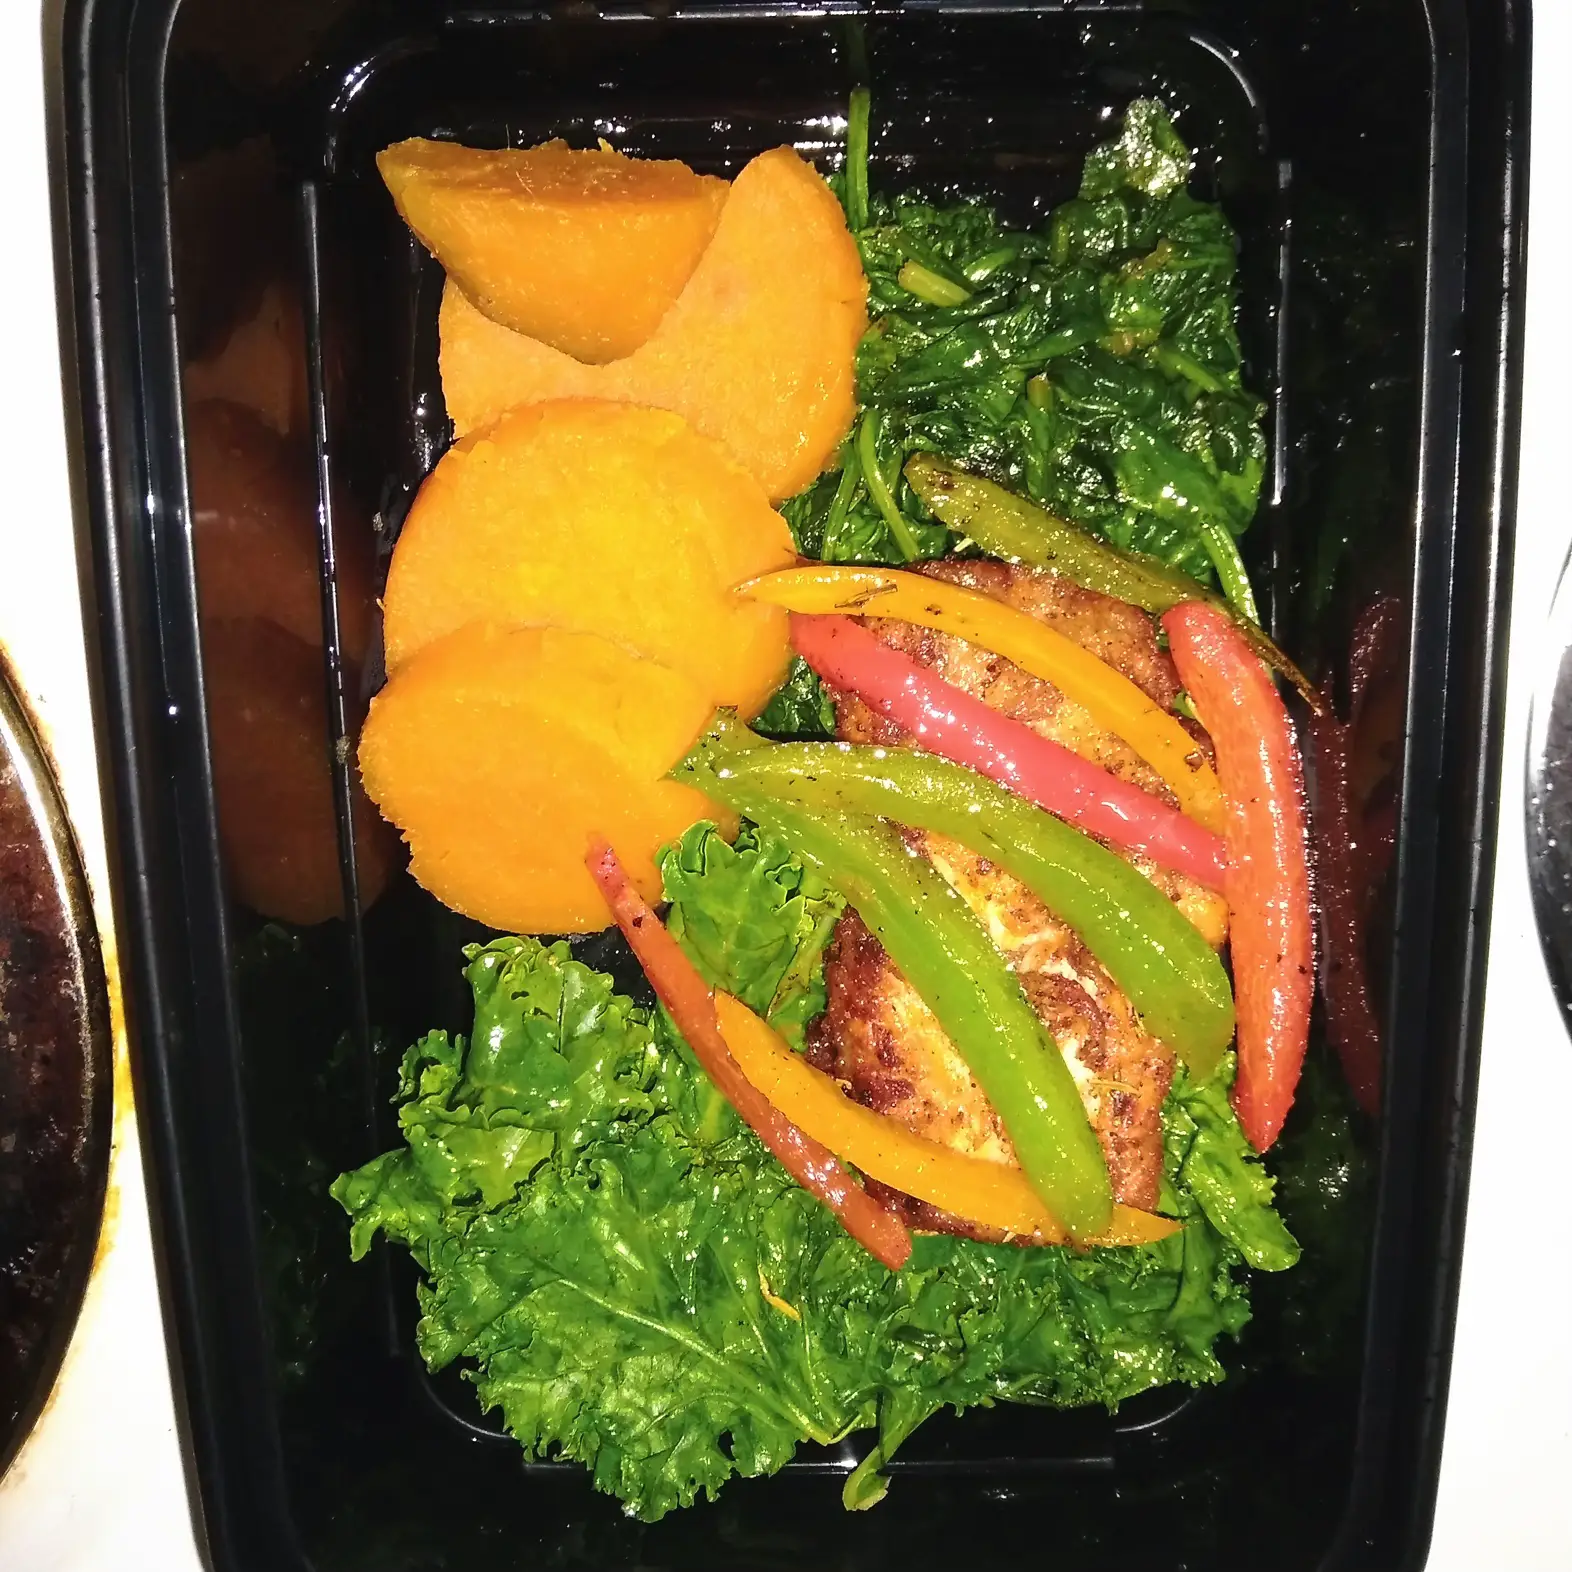 HEALTHY MEAL PREP MUST HAVES  Gallery posted by alwayseatingnyc